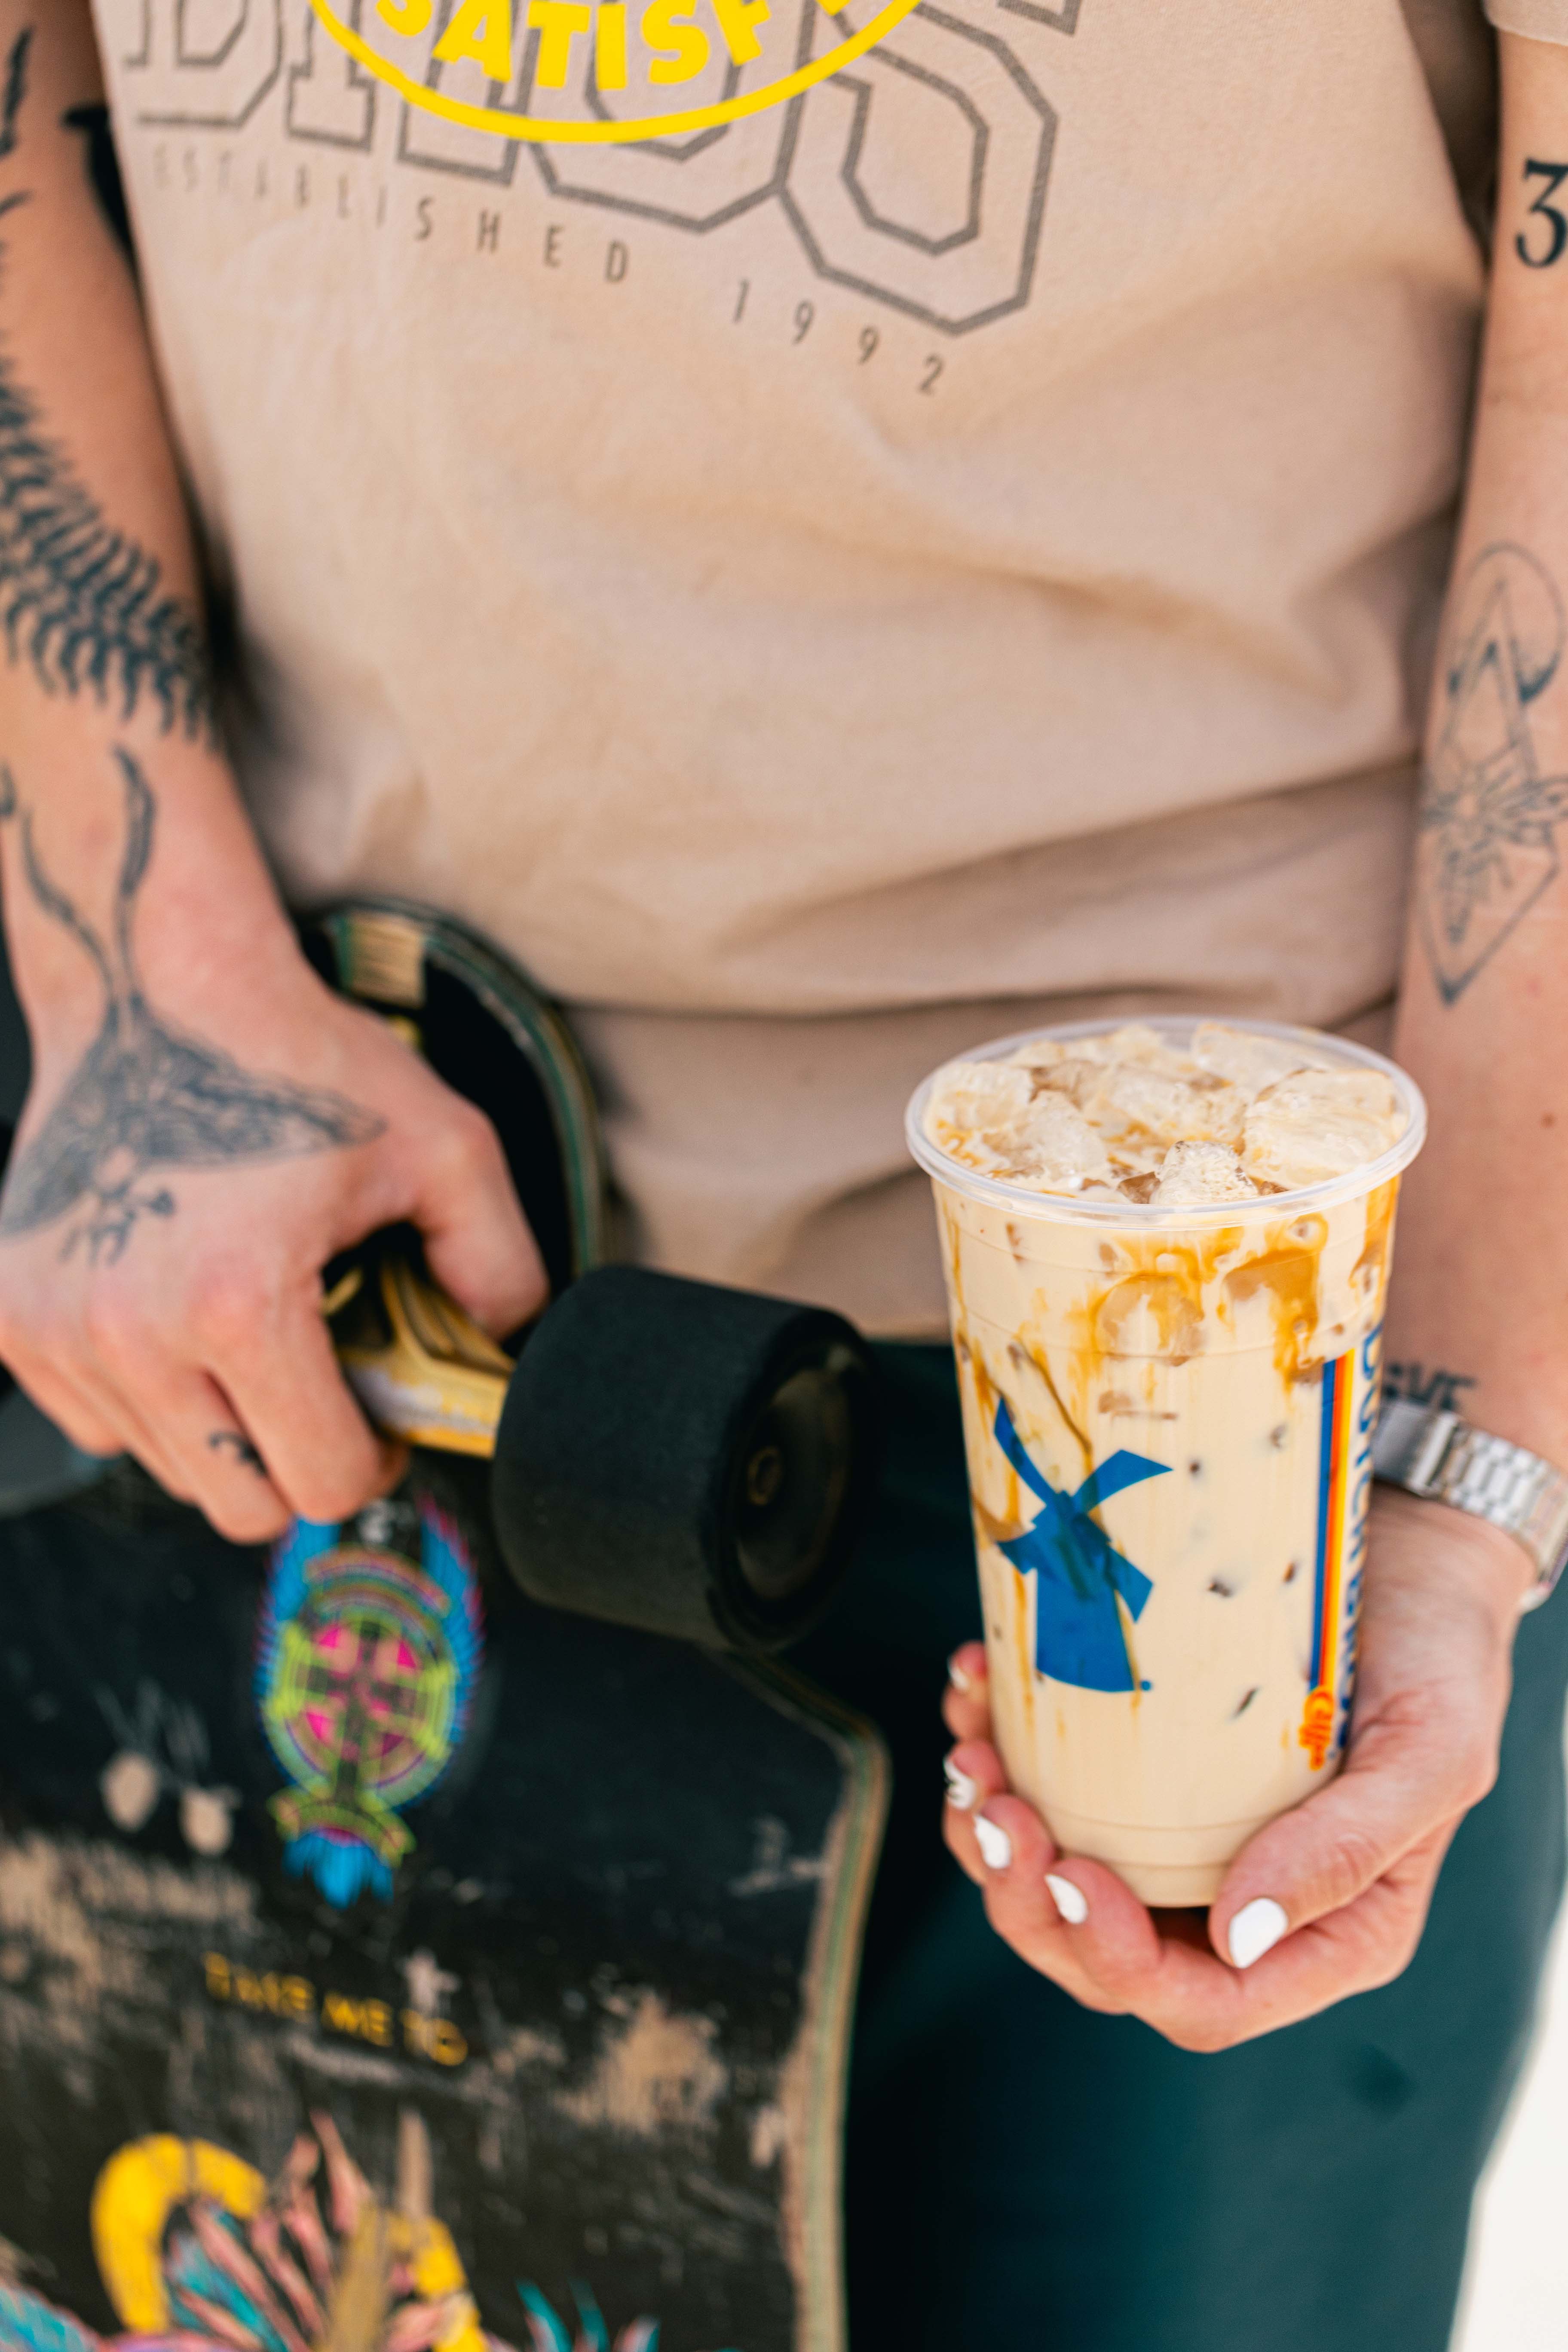 Try the Golden Eagle coffee featuring the caramel drizzle of your dreams. Dutch Bros Coffee Pocatello (541)955-4700